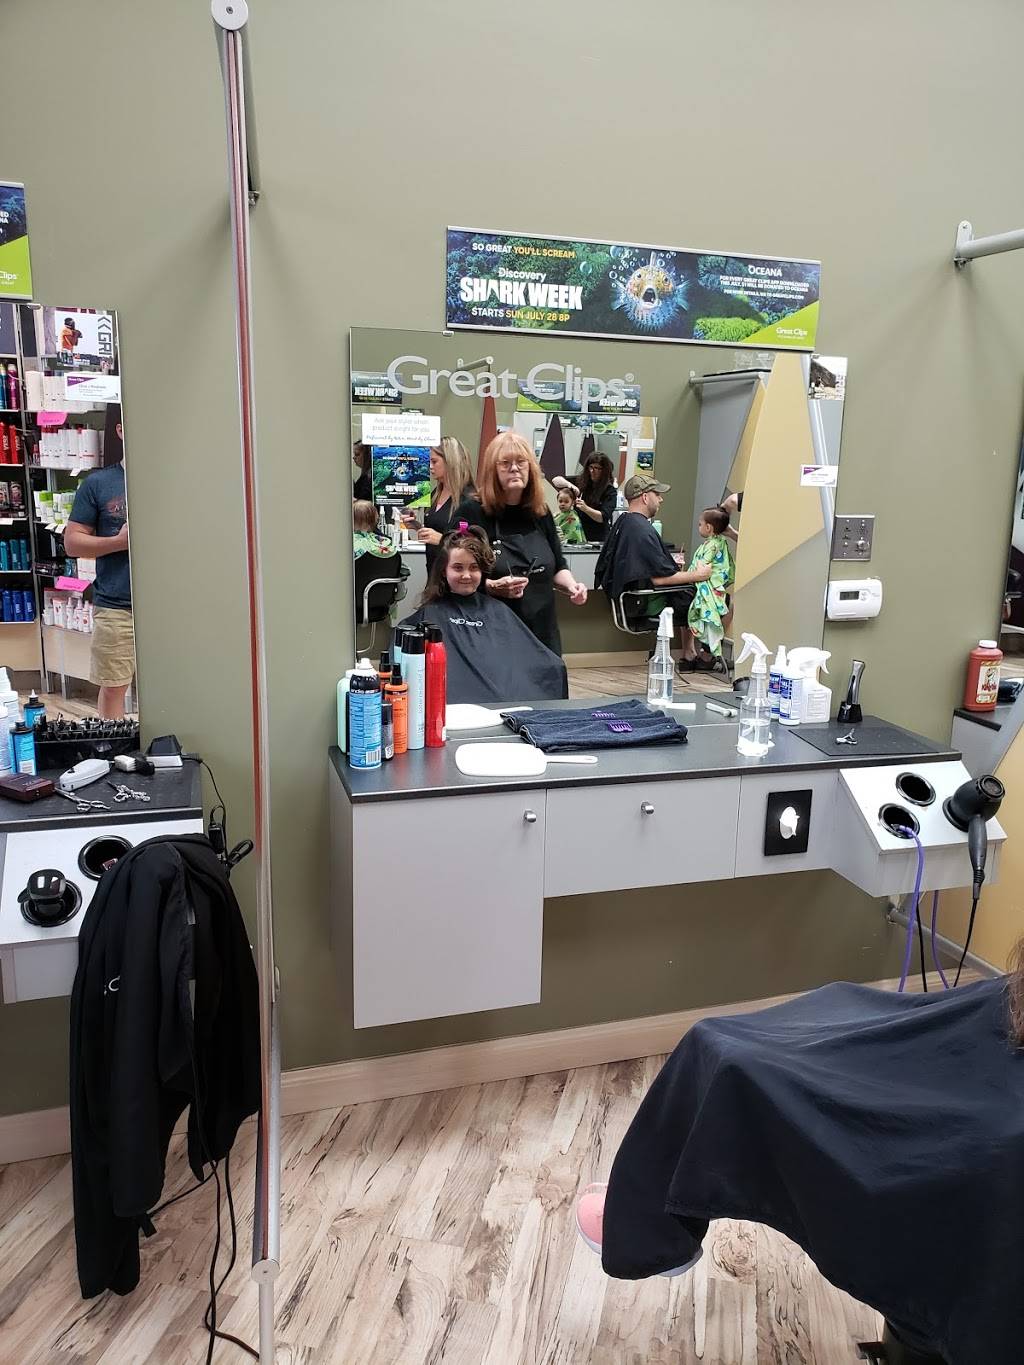 Great Clips | 23195 Marter Rd Ste 150, St Clair Shores, MI 48080 | Phone: (586) 443-4244